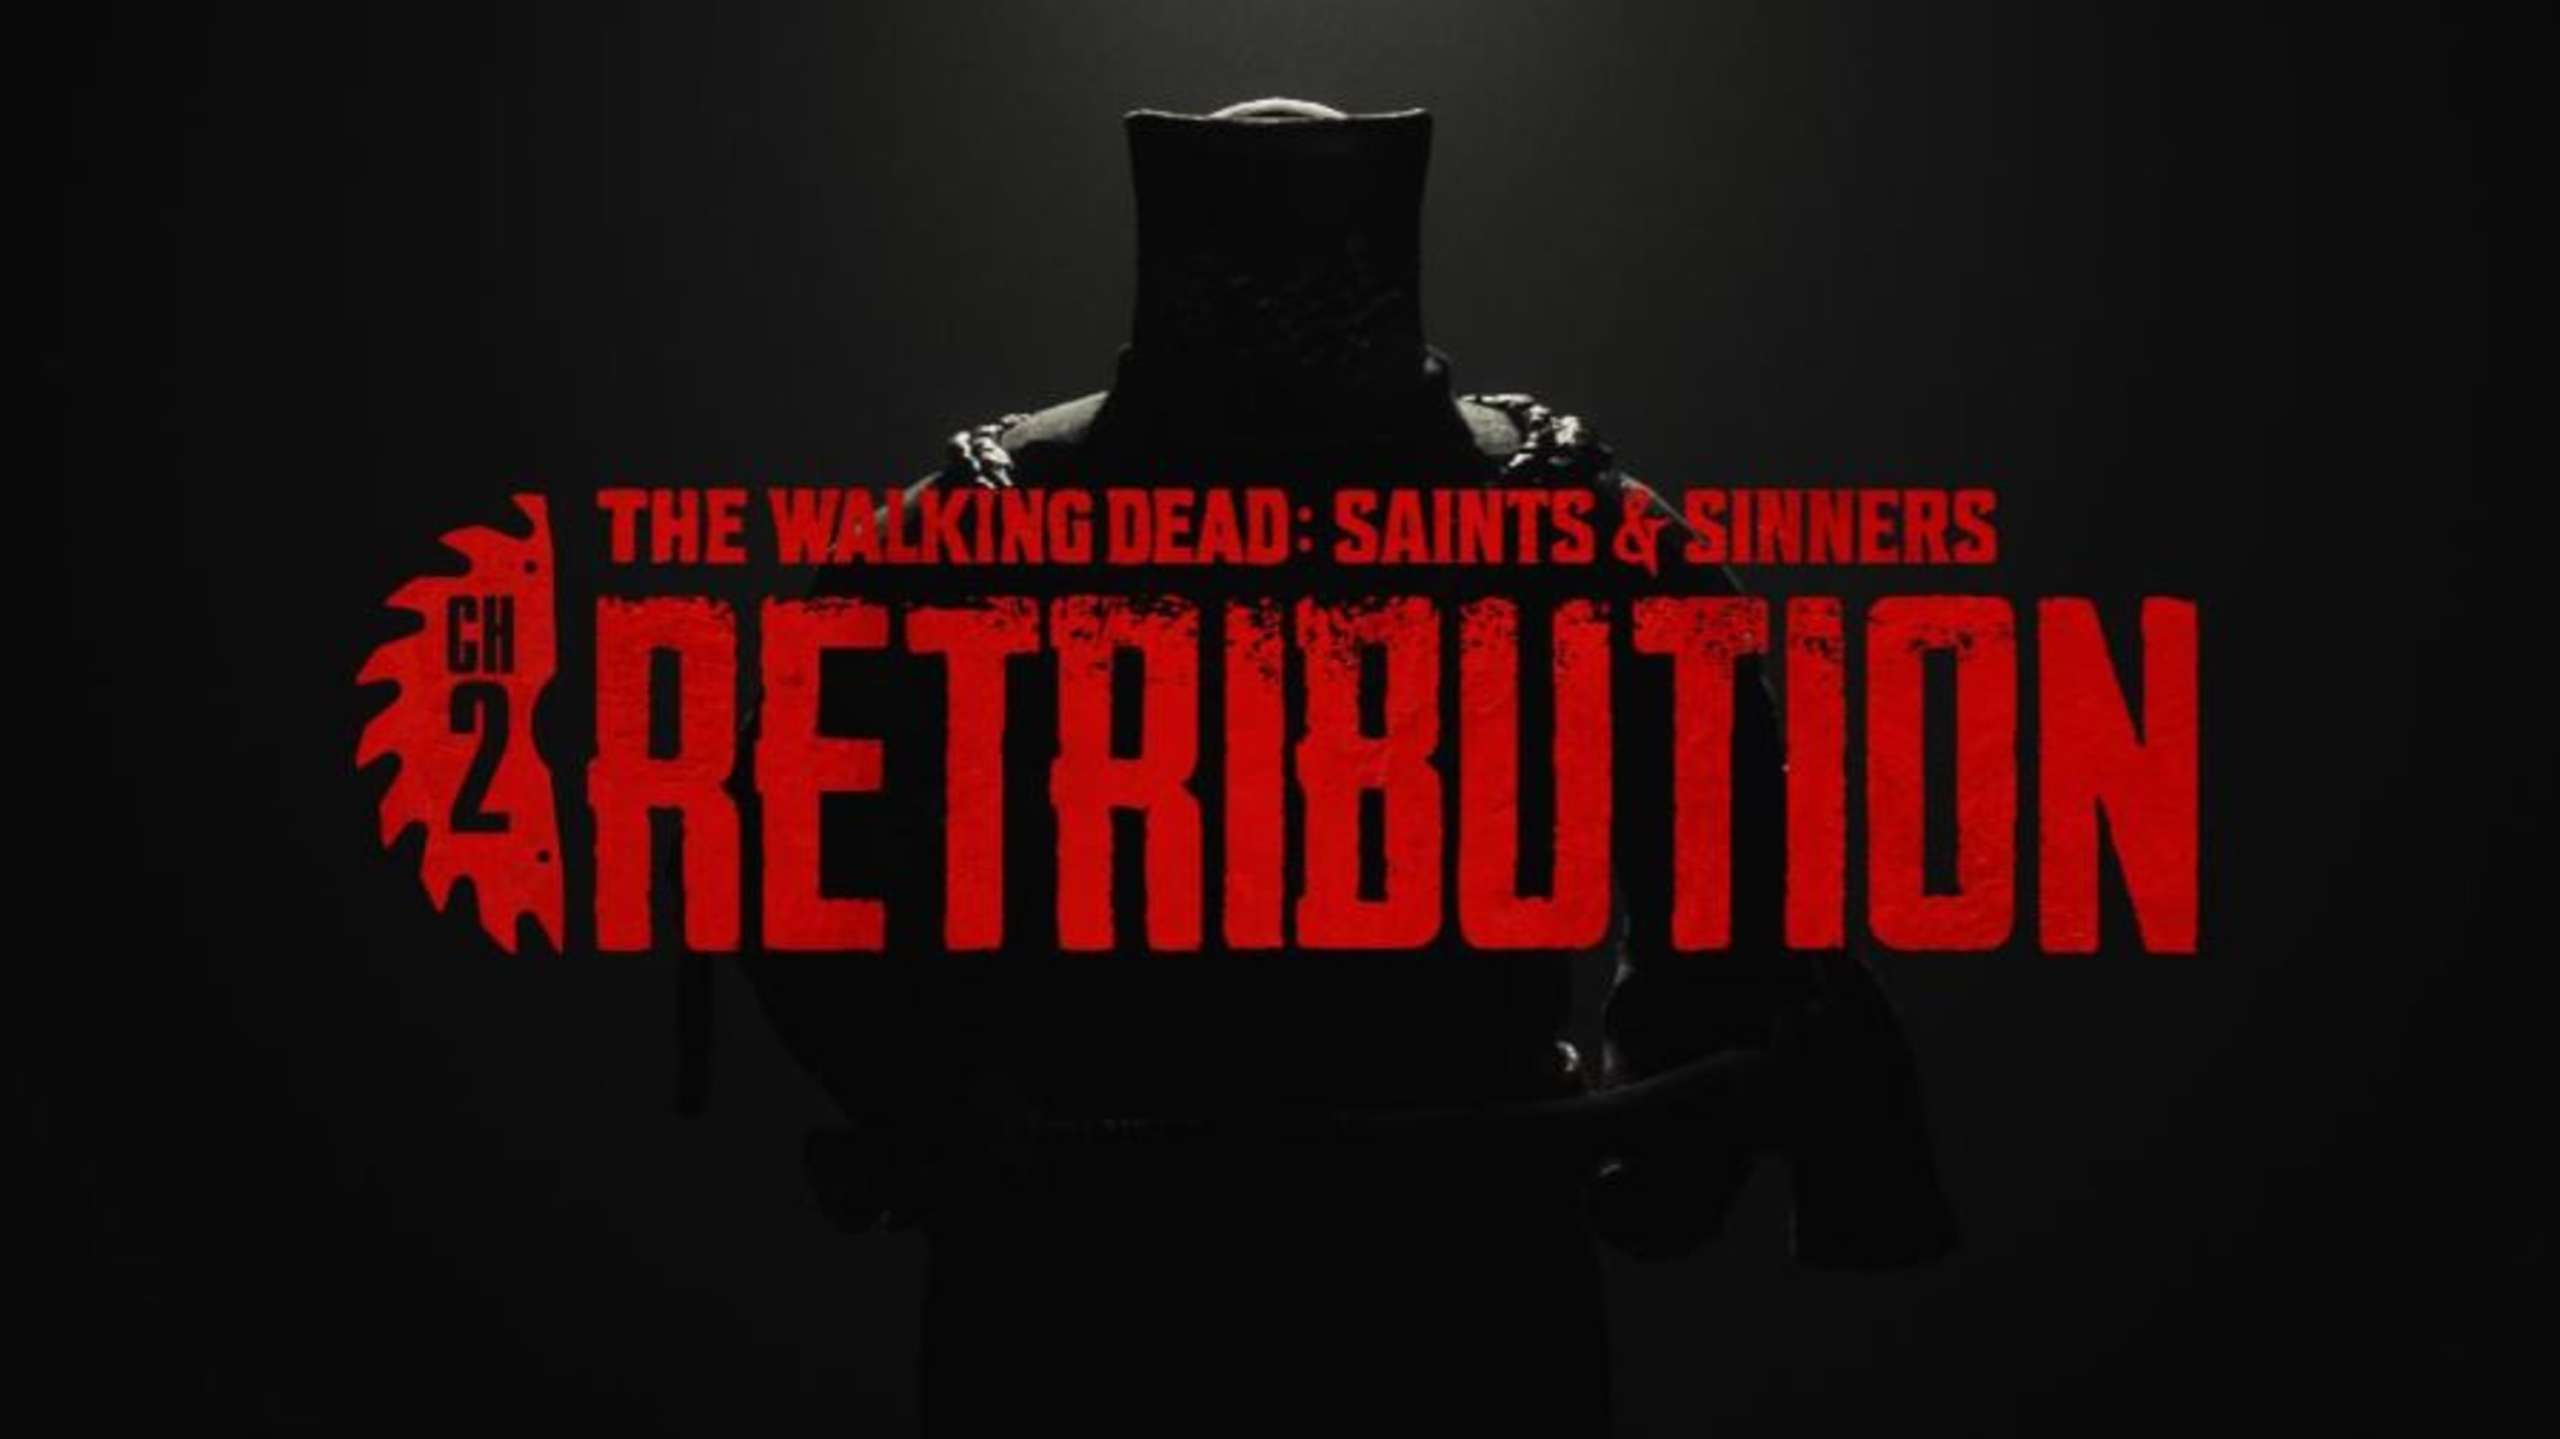 In A New Trailer, The Producers Of The Walking Dead: Saints And Sinners Have Revealed The Release Date For The Following Game In The Digital Reality Series